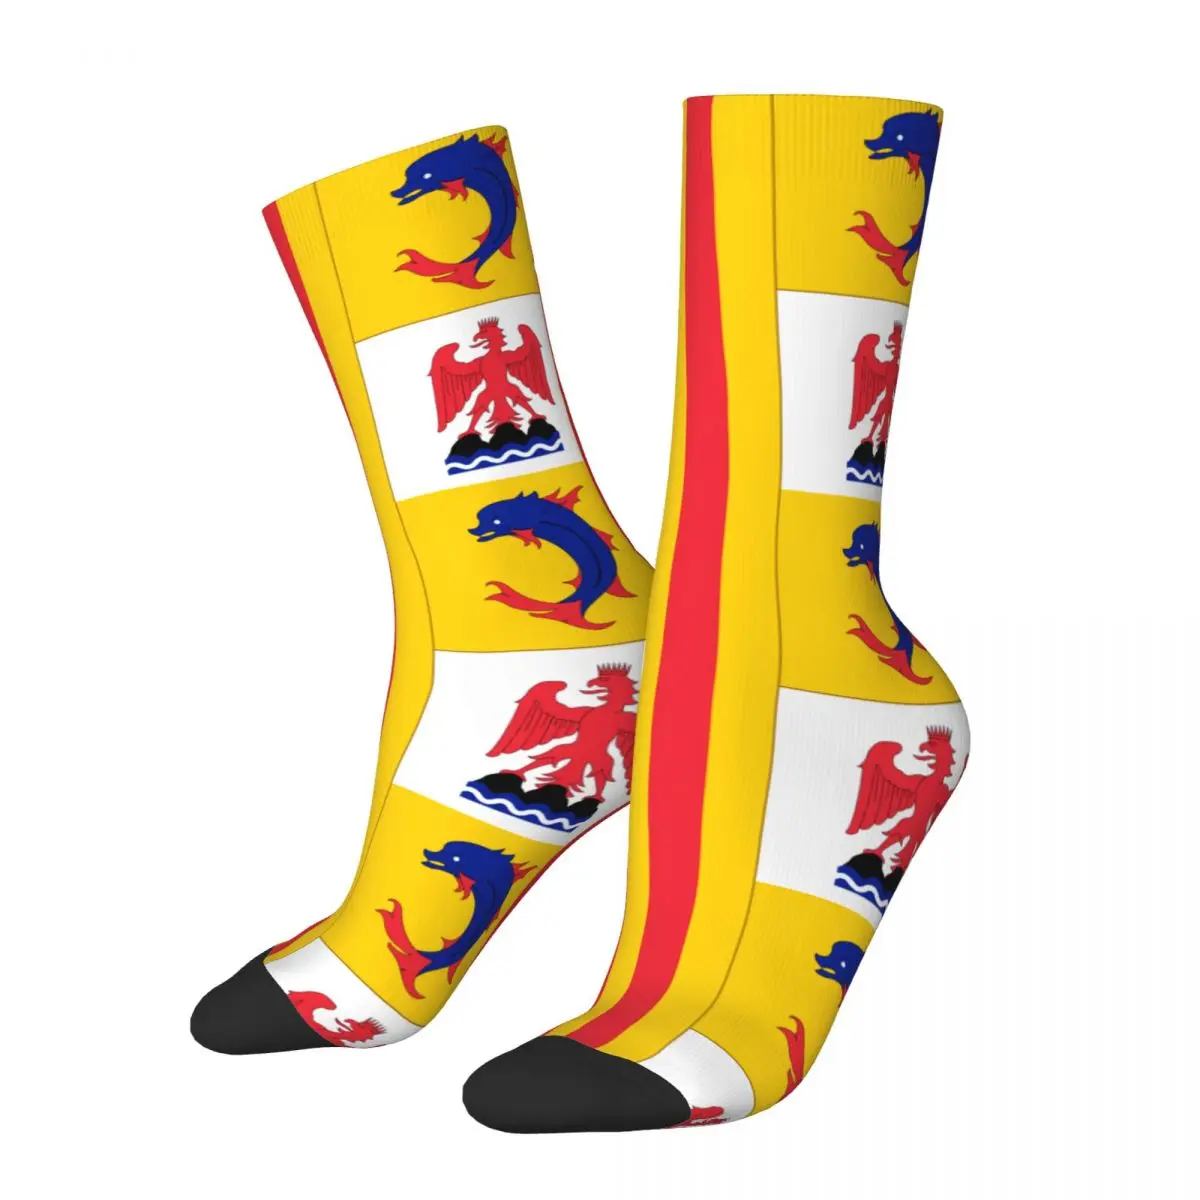 

Flag Of Provence-Alpes-Côte D'Azur 284-France Stocking Top Quality The Best Buy Color contrast Funny Novelty Compression Socks